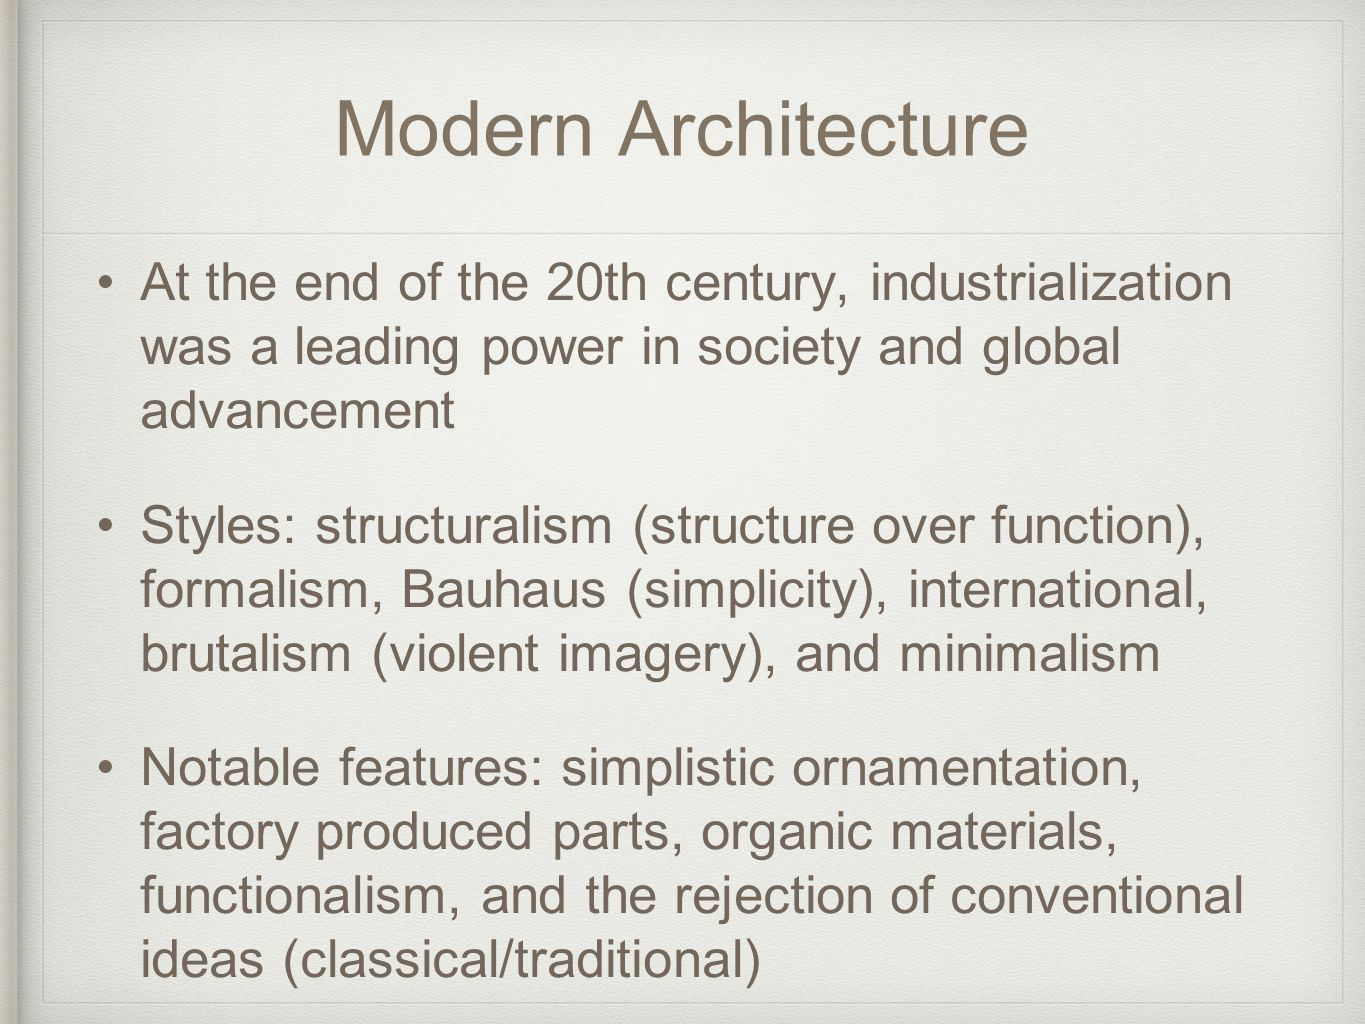 Modern Architecture At the end of the 20th century, industrialization was a leading power in society and global advancement.